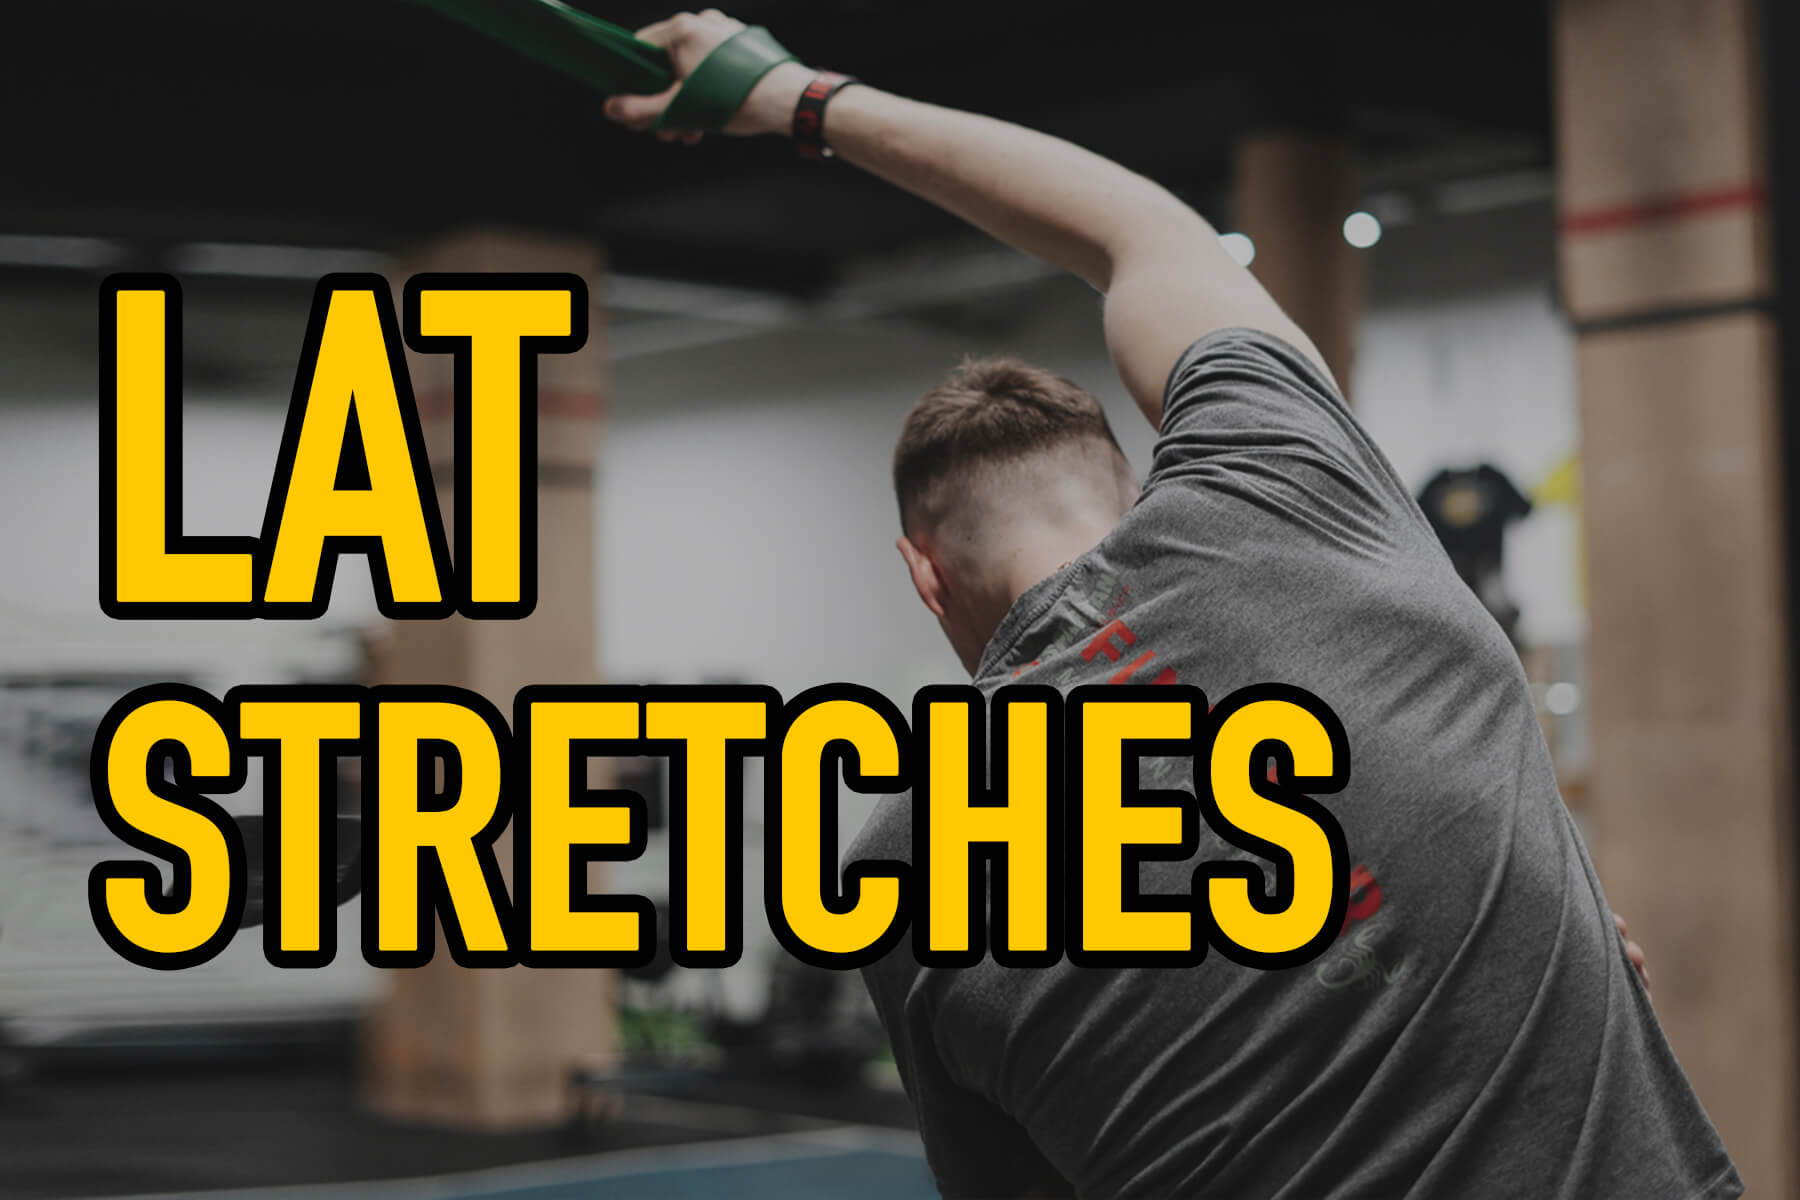 Lat Stretches Excercises